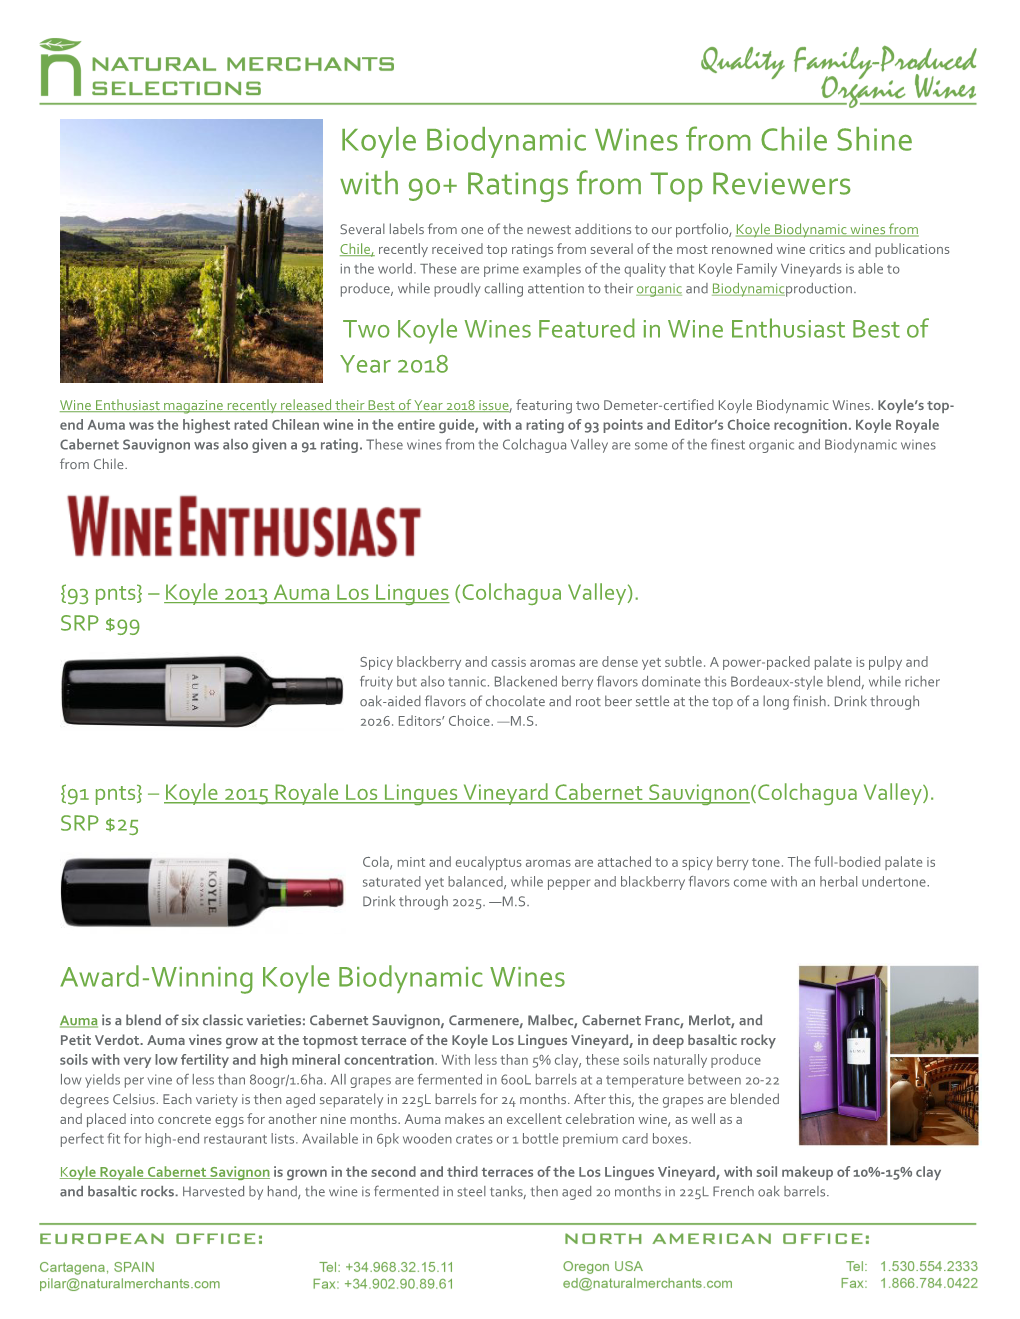 Koyle Biodynamic Wines from Chile Shine with 90+ Ratings from Top Reviewers